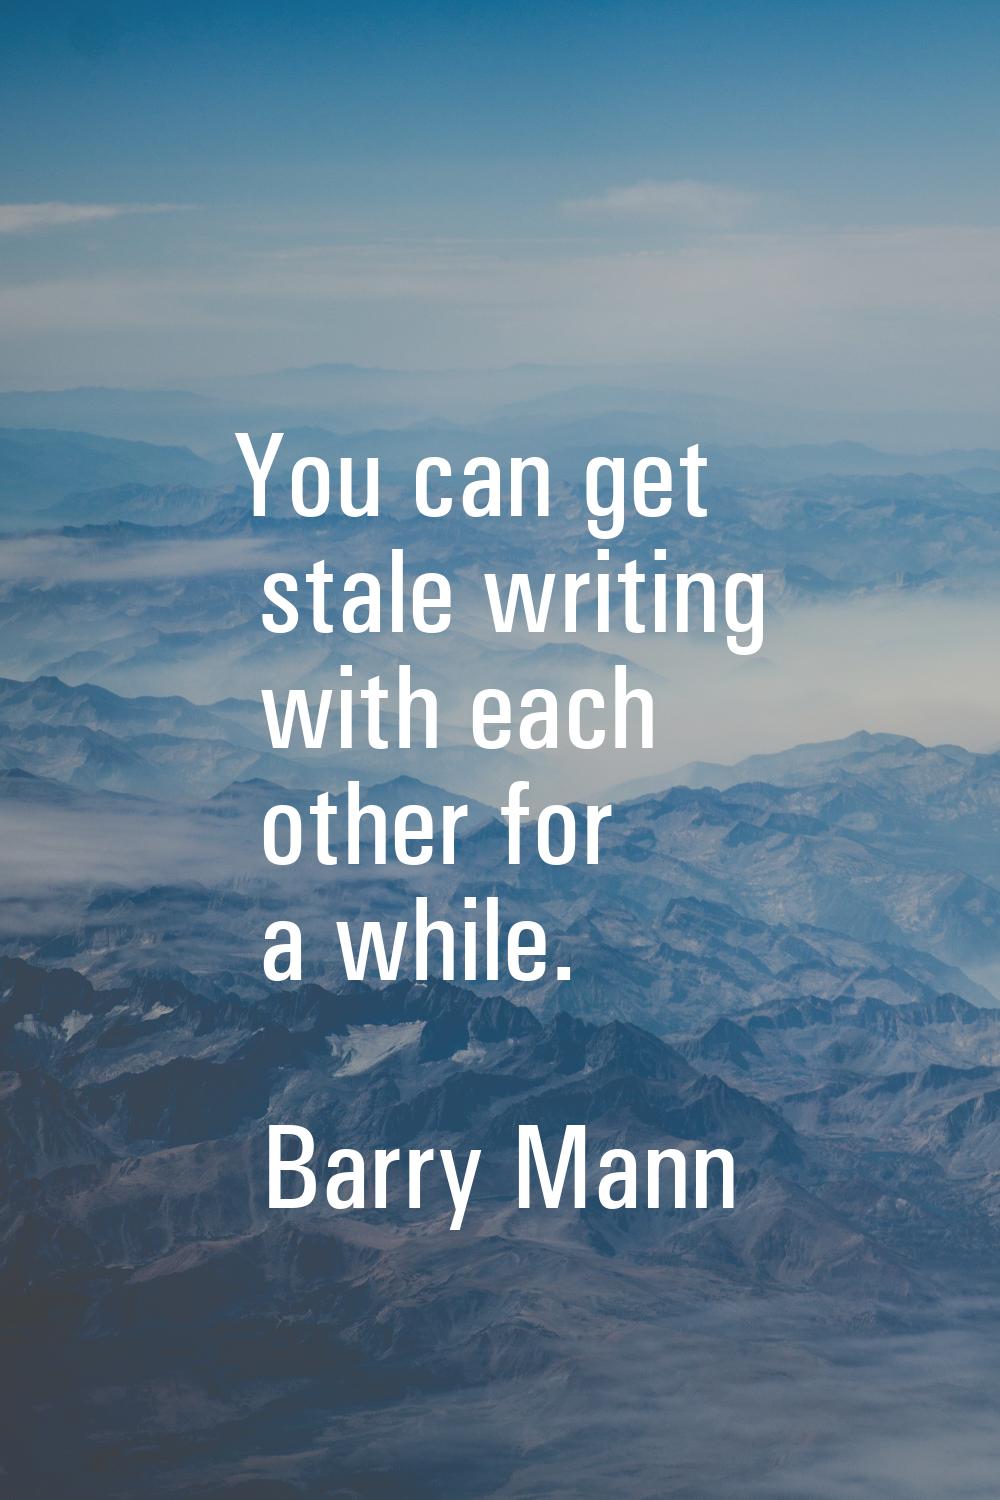 You can get stale writing with each other for a while.